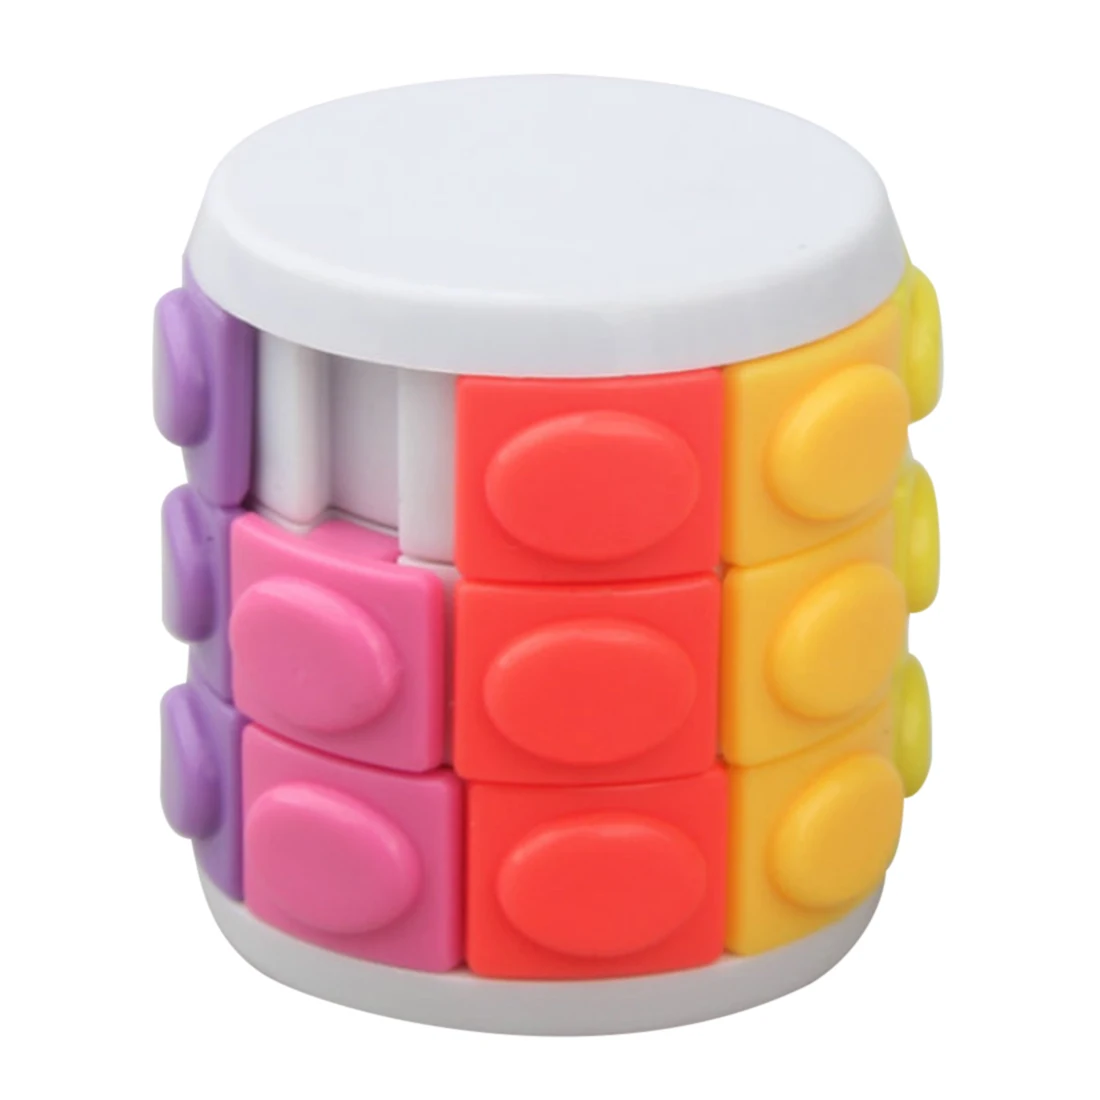 Color Magic Tower Cube Educational 3/5/7 Layer Creative Sliding 3D Puzzle Toy Antistress Toys for Children - Цвет: Type A